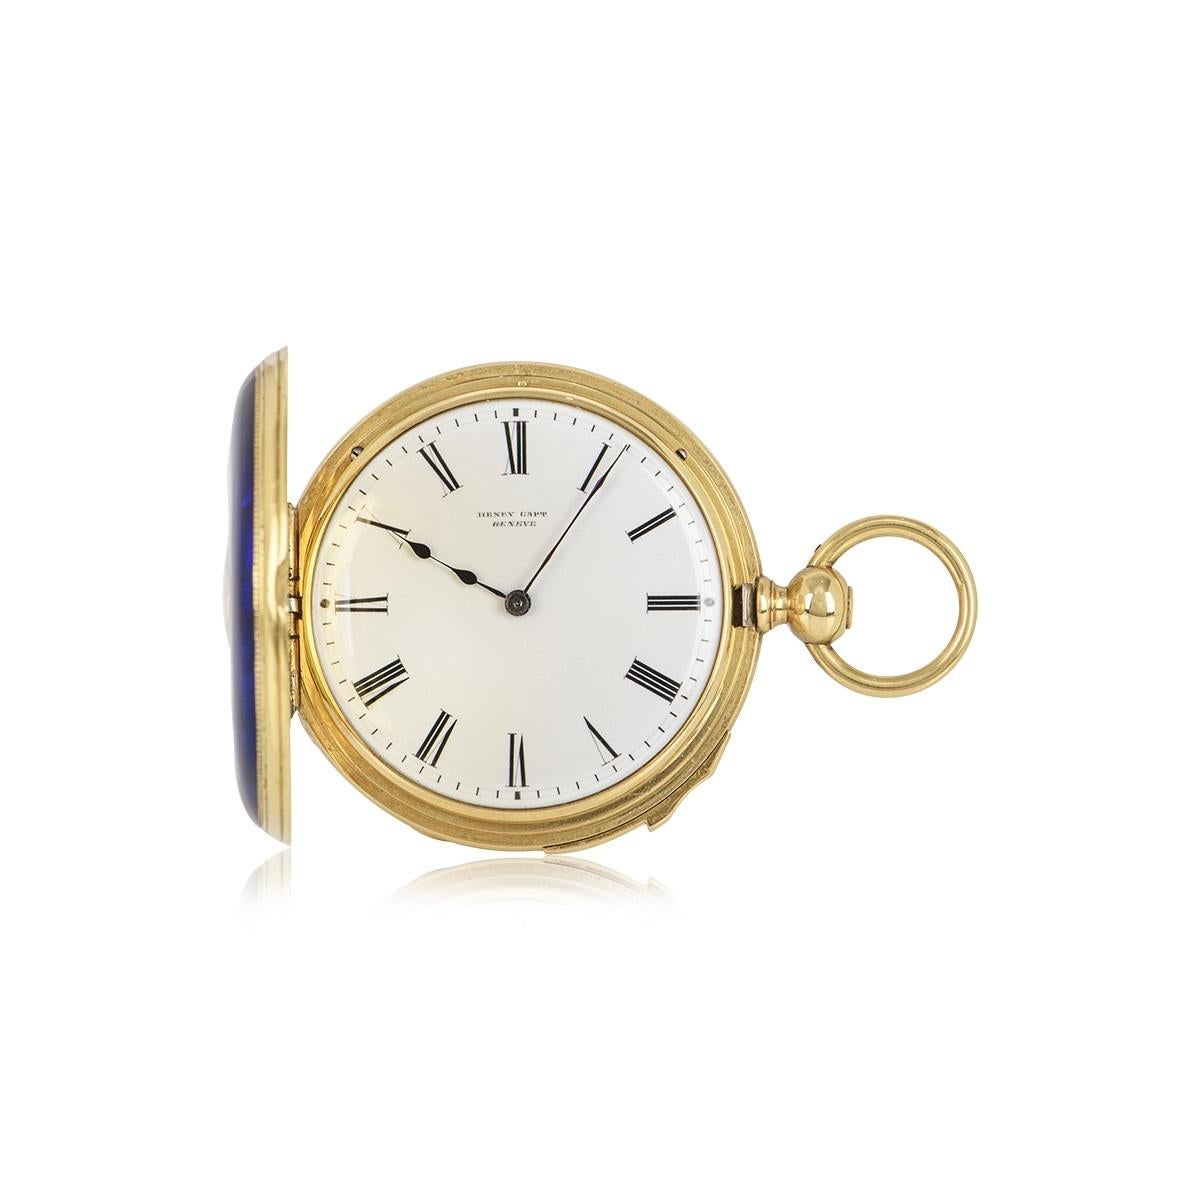 A quarter repeating keywind 35mm enamel half hunter pocket watch. The front and back cover is enamelled in a dark blue starburst guilloche enamel.

The gold coloured Roman numerals and gold coloured inner chemin de fer chapter ring, signed white